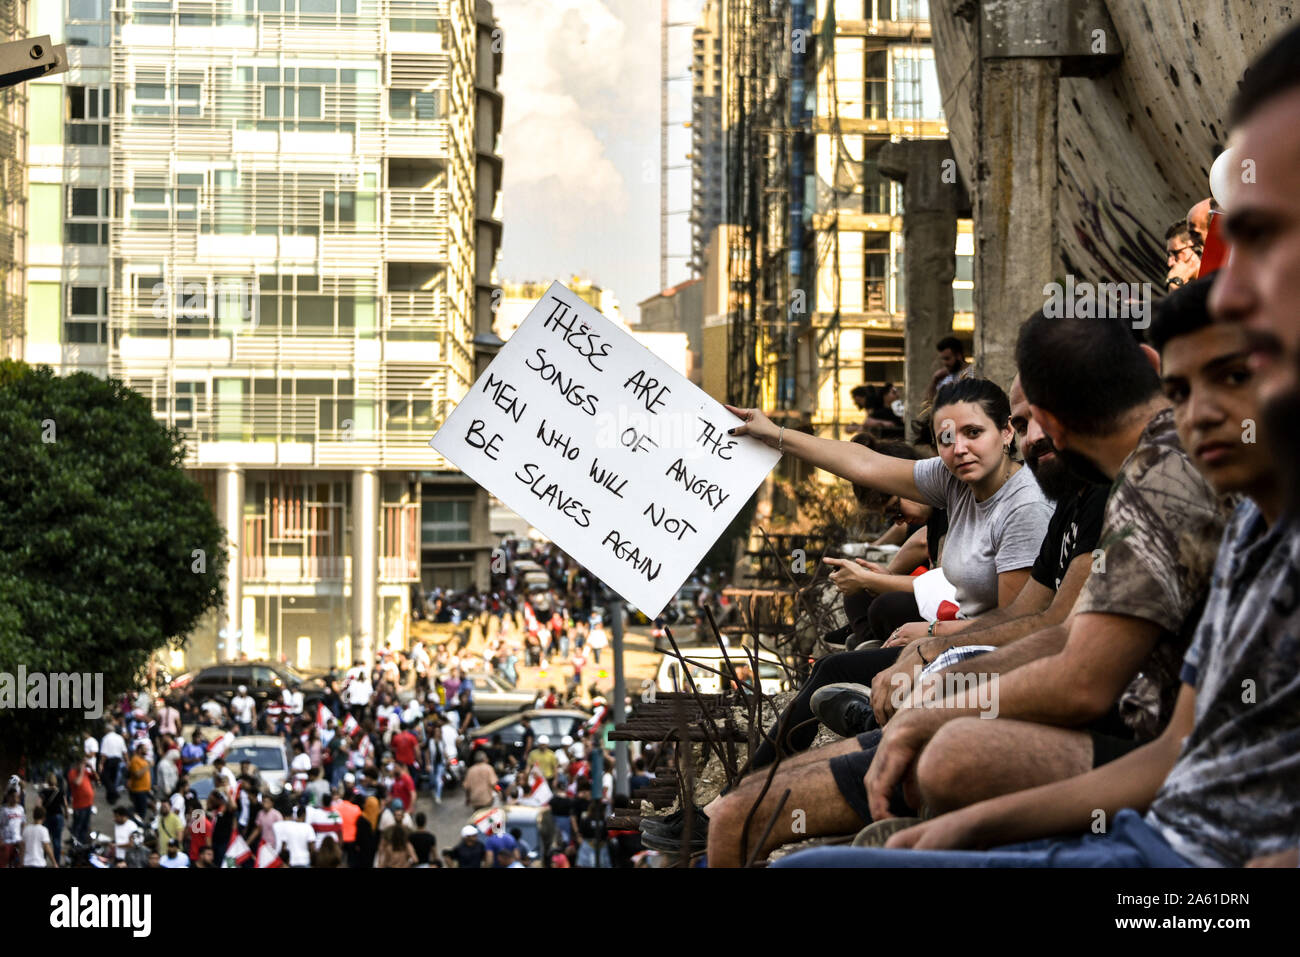 A protester sitting on the iconic Egg building in Downtown Beirut holds out a sign with a quote from Les Mis 'These are the songs of angry men who will not be slaves again'. The people of Lebanon say they will not stop revolting until the entire government has stepped down. Across the country similar mass gatherings have settled in for the long haul as the people come together for a 7th consecutive day. United under one flag, this multi-sect country is calling for an end to its sectarian government and retribution for the corruption it has been subject to for 30 years. Stock Photo